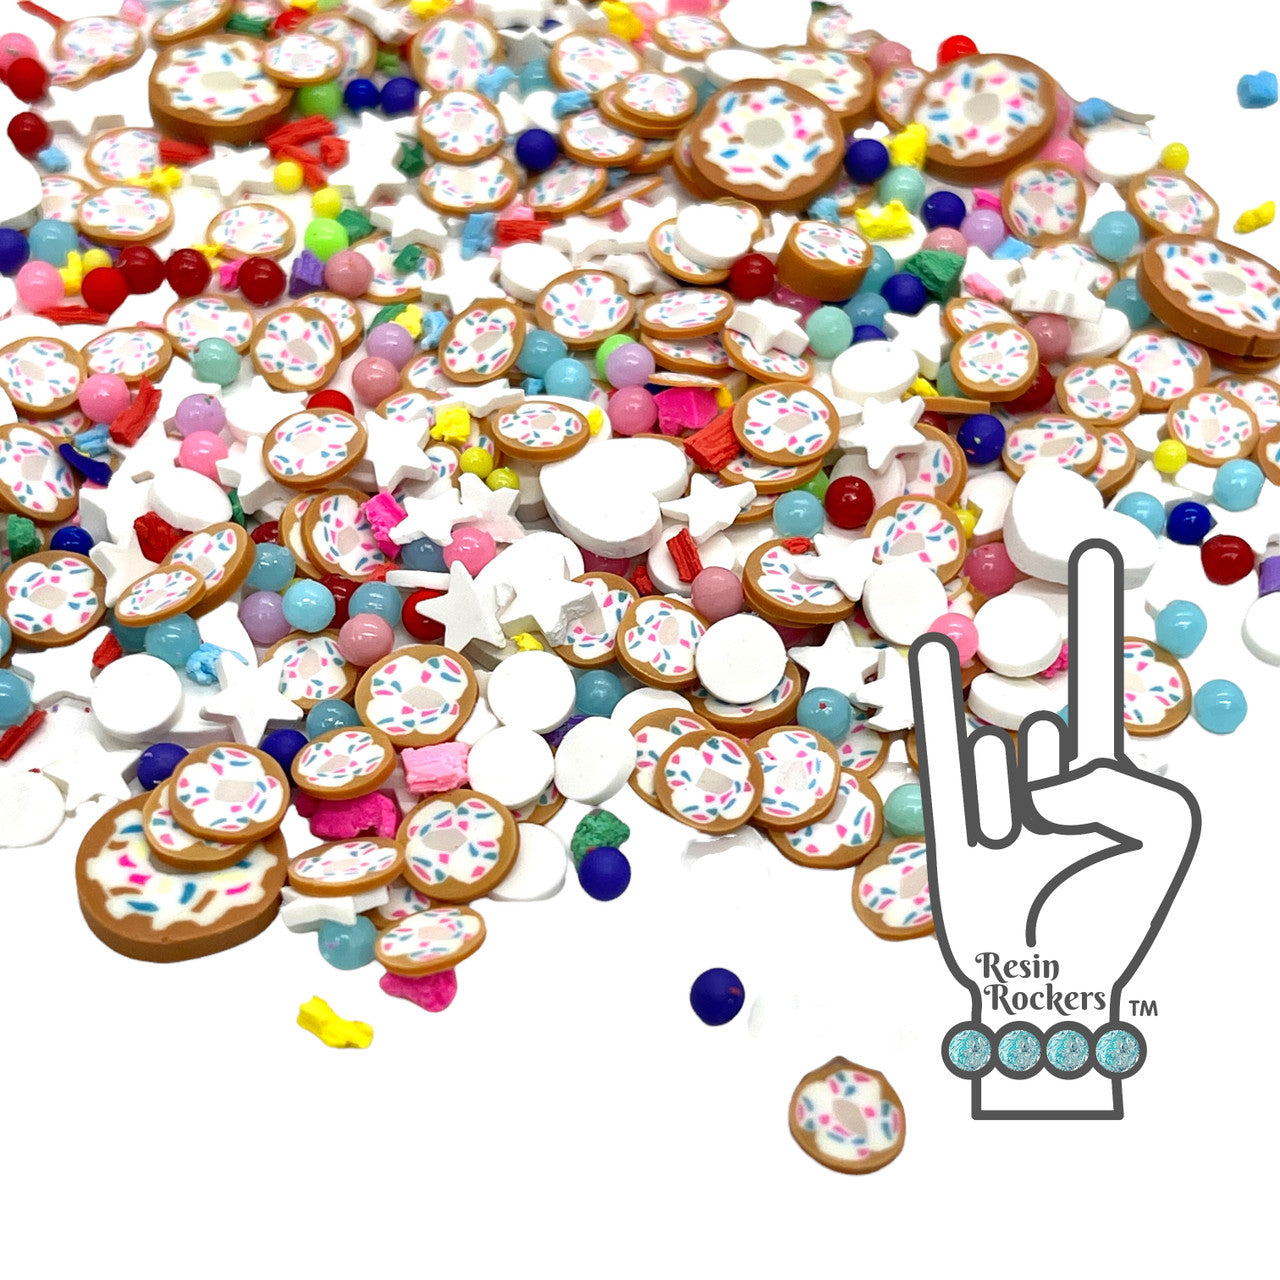 Donuts and Confetti Mega Mix Aqua Jimmy Sprinkles Pearls and Gems Shaker Filler and Polymer Clay Pieces for Epoxy and UV Resin Art Snow Globe and Shaker Filler